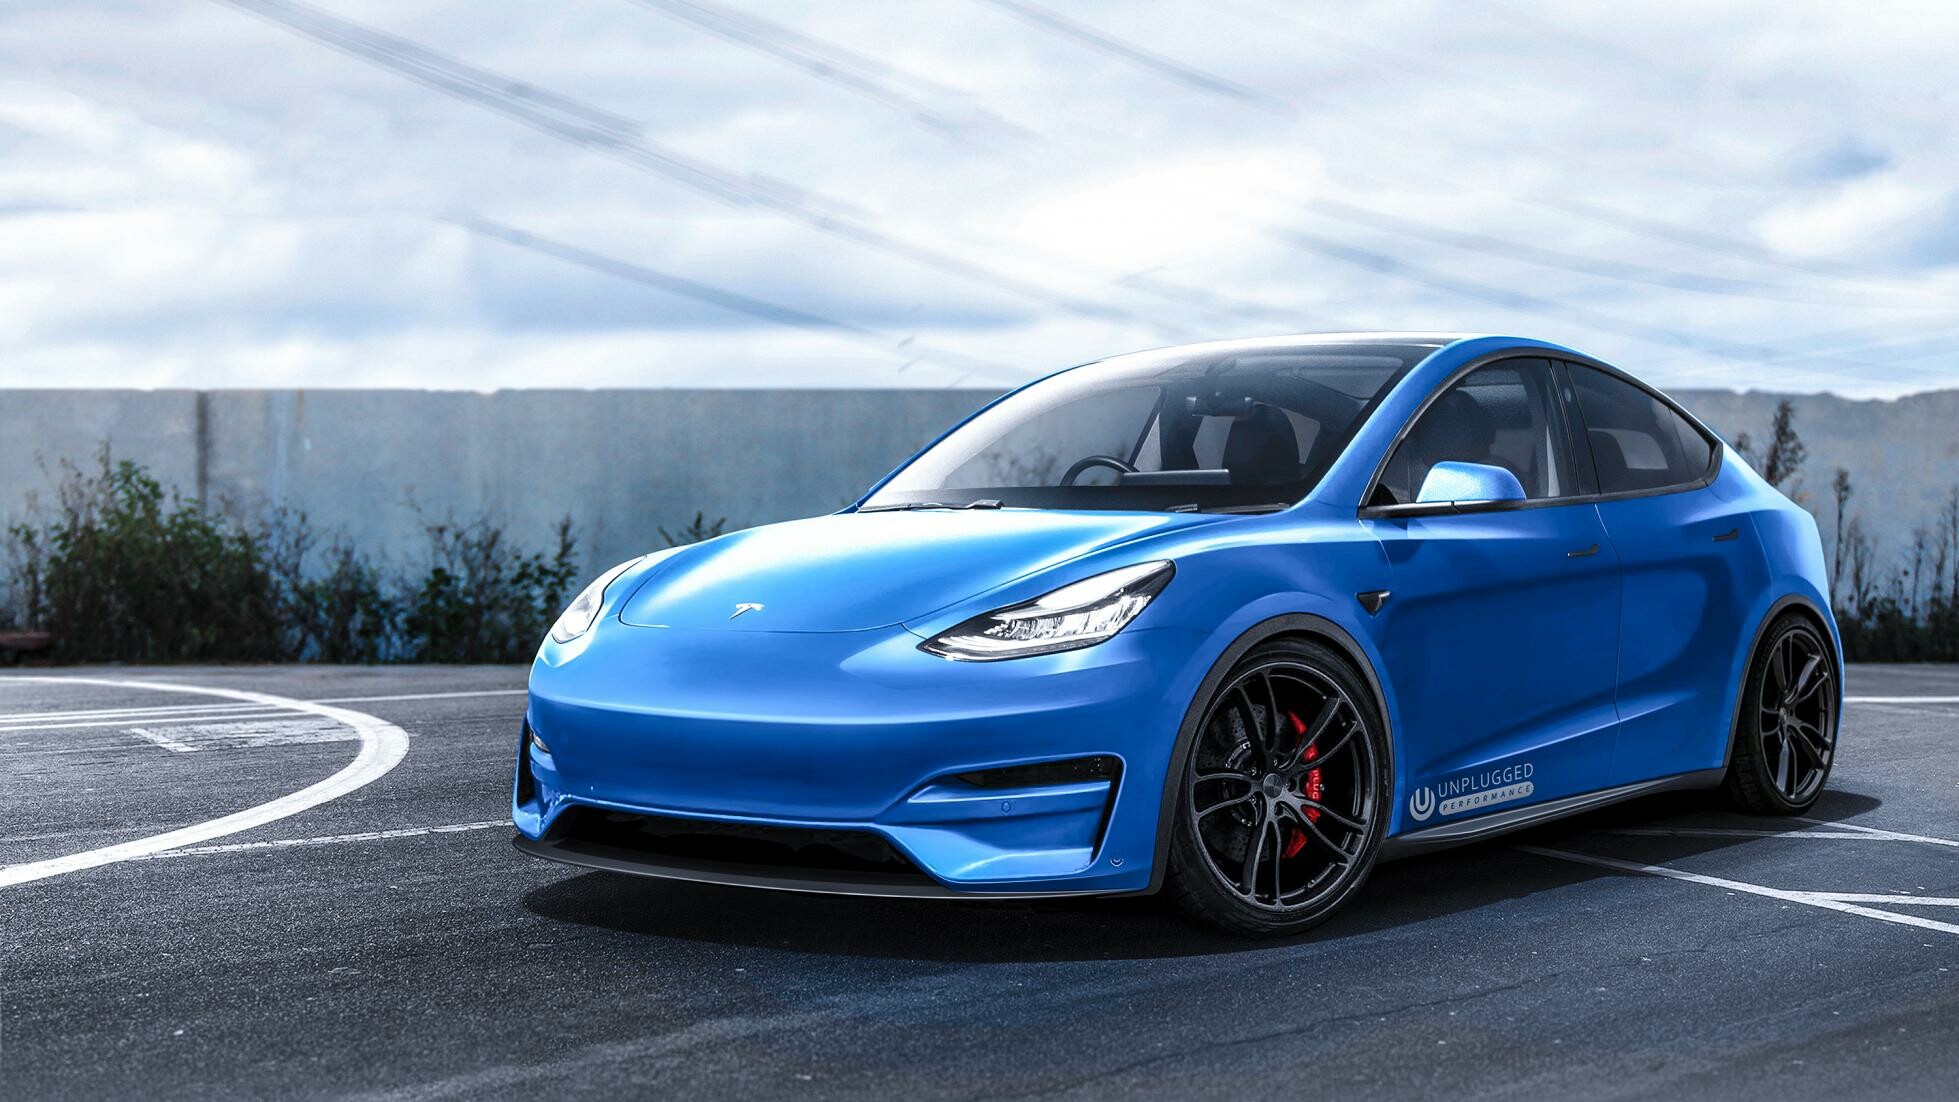 Tesla Model Y: An electric crossover unveiled in March 2019, Electric car. 1960x1110 HD Wallpaper.